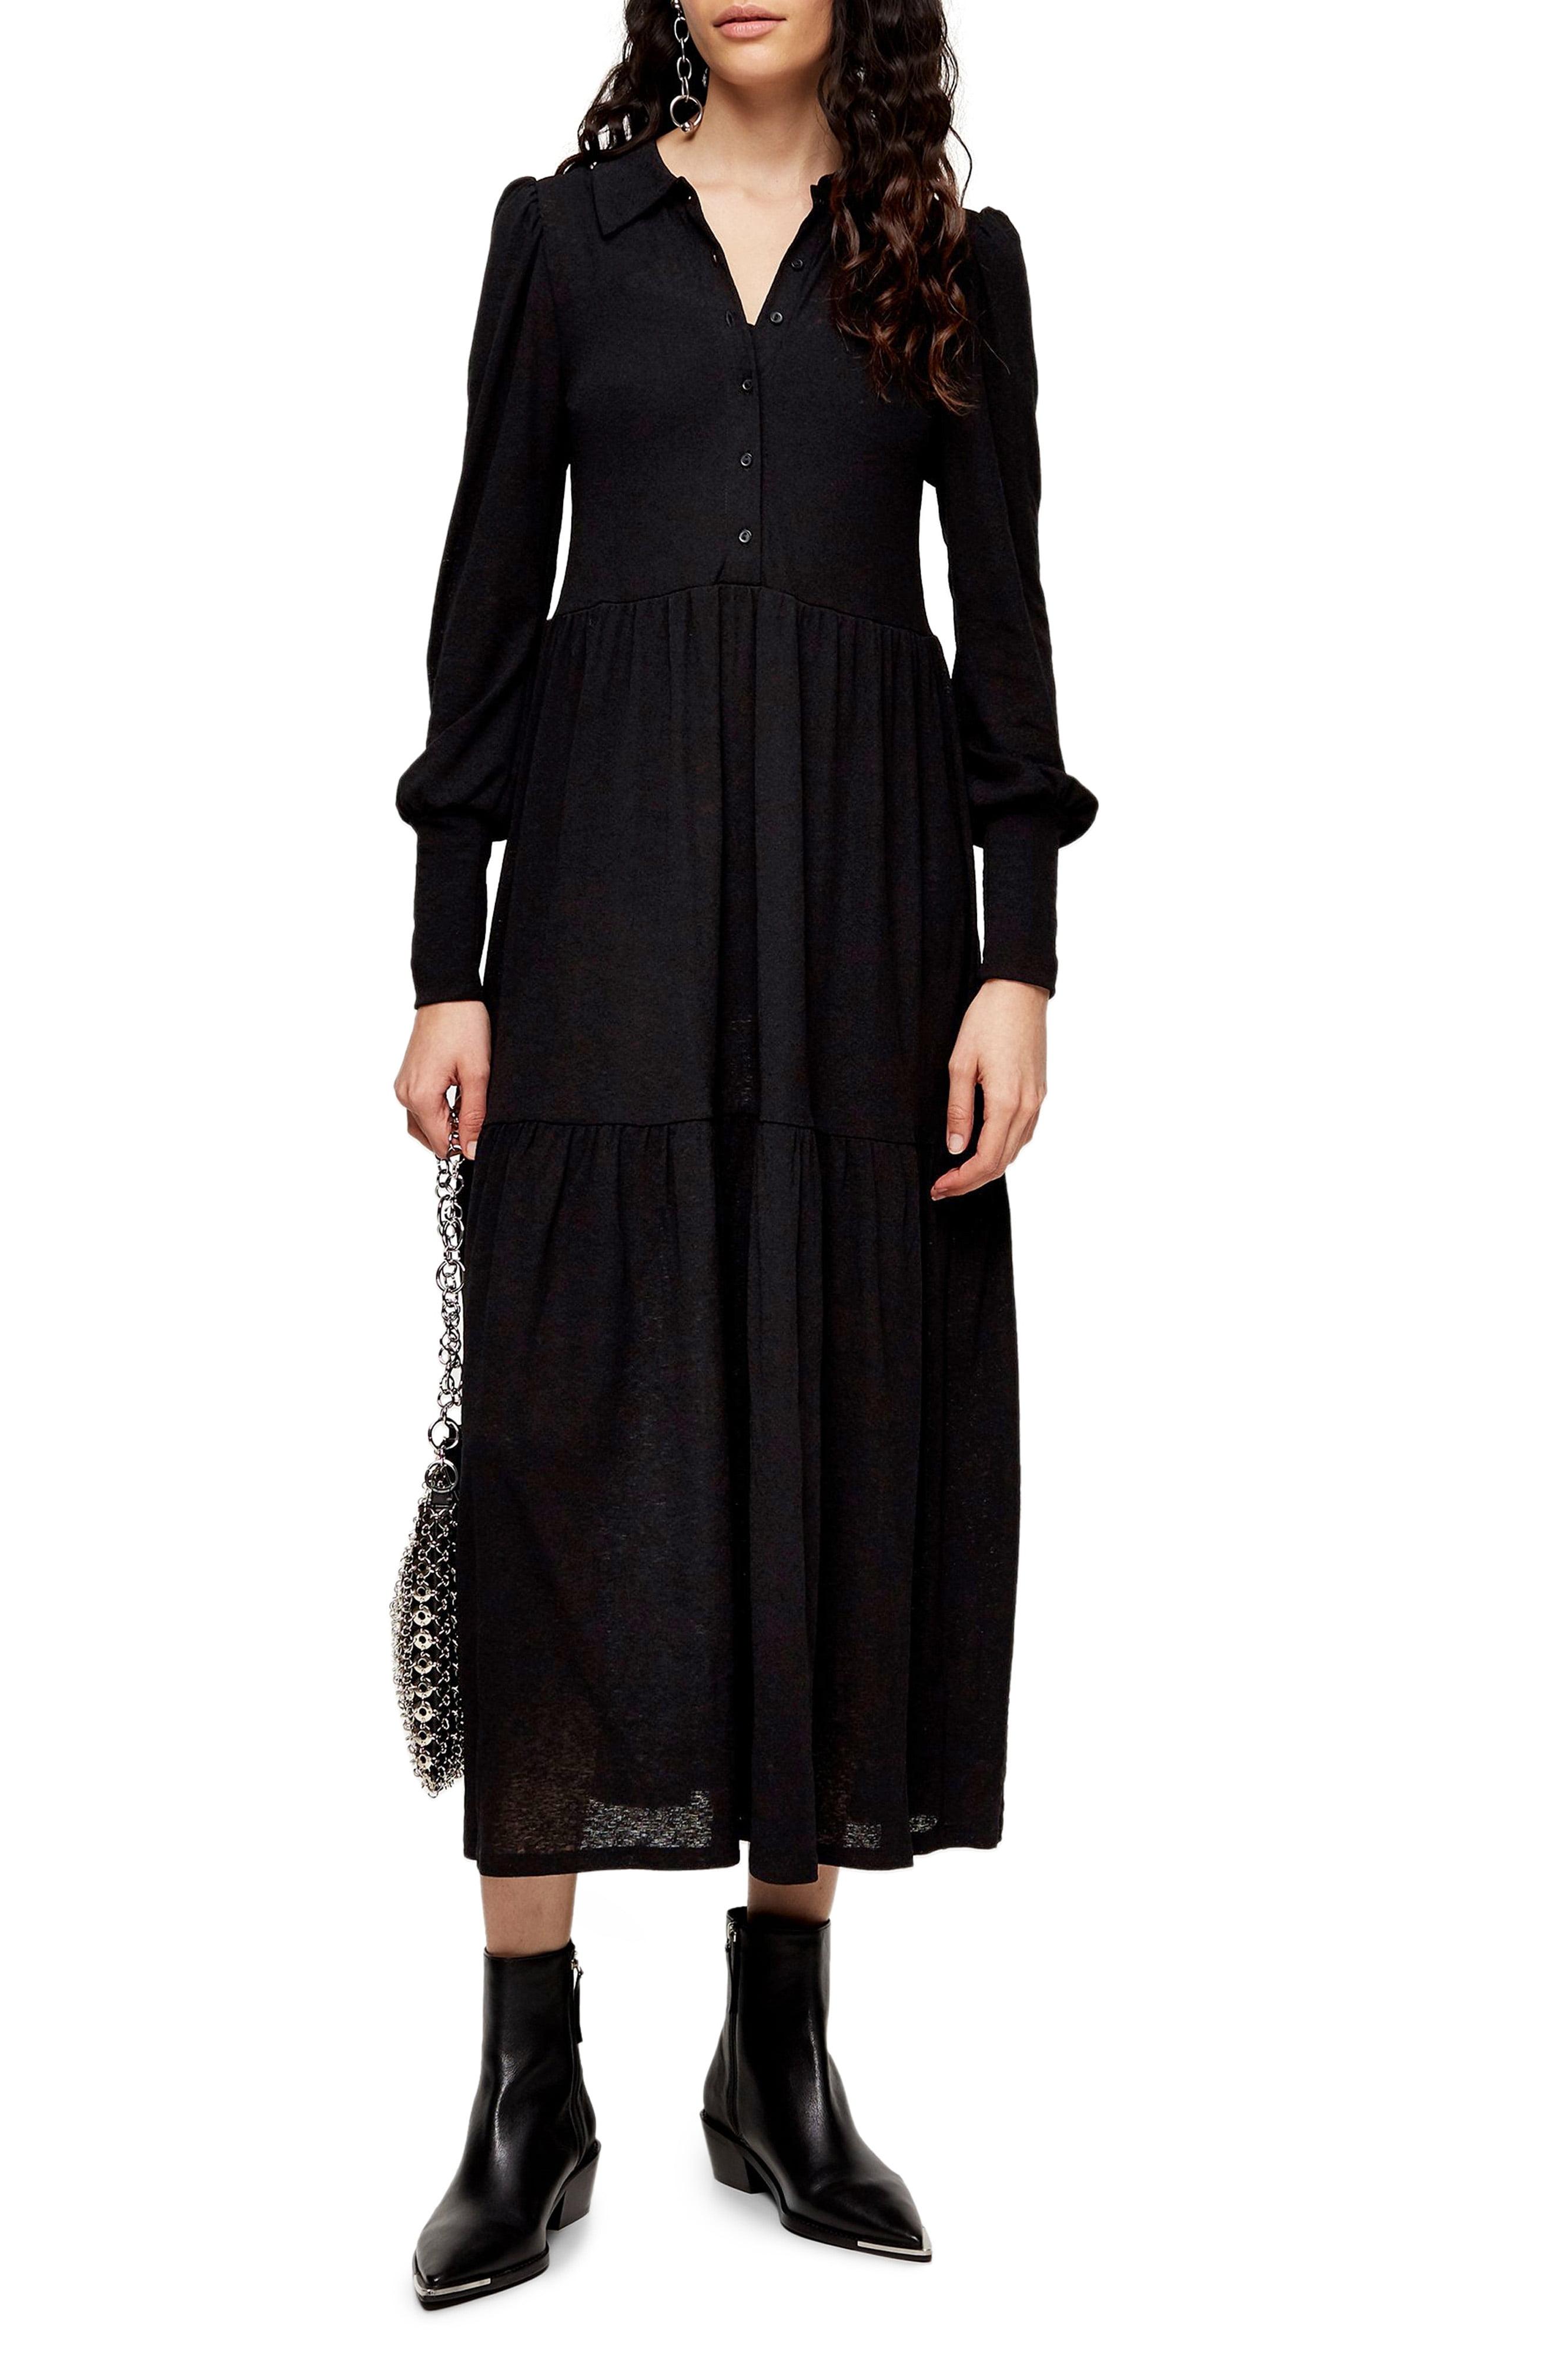 TOPSHOP Synthetic Cardigan Tiered Midi Dress in Black - Save 3% - Lyst